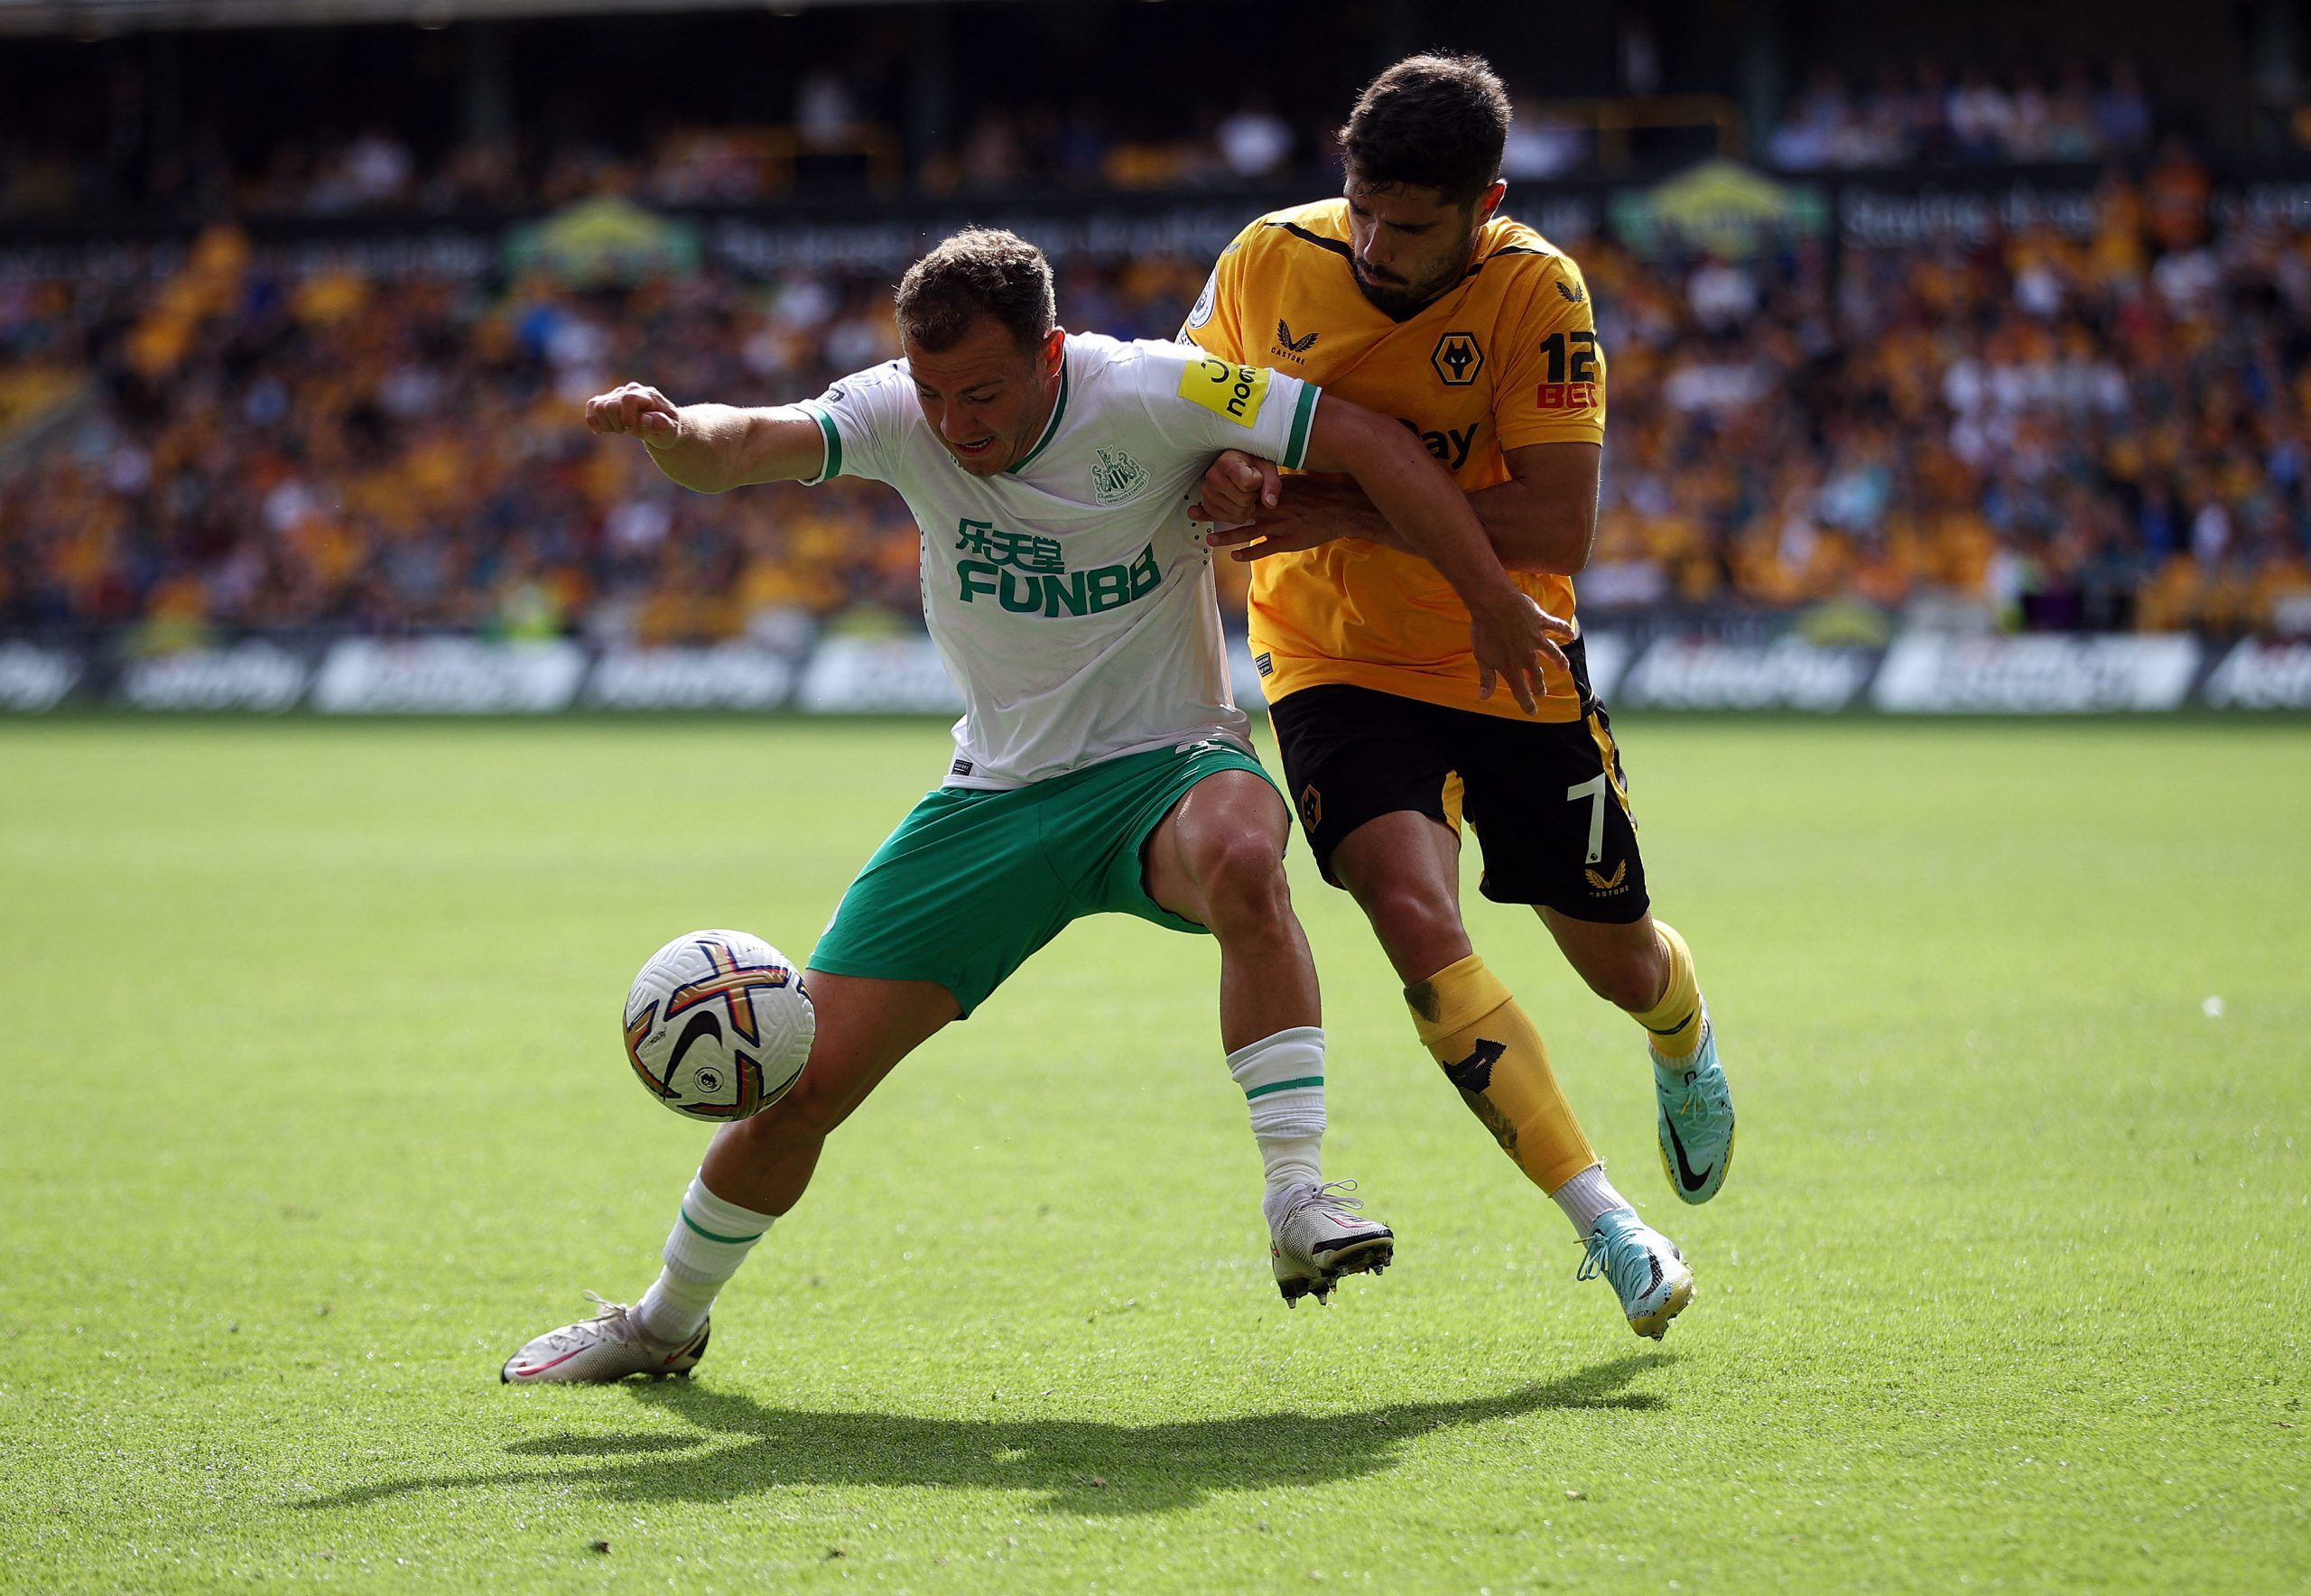 Soccer Football - Premier League - Wolverhampton Wanderers v Newcastle United - Molineux Stadium, Wolverhampton, Britain - August 28, 2022 Newcastle United's Ryan Fraser in action with Wolverhampton Wanderers' Pedro Neto Action Images via Reuters/Molly Darlington EDITORIAL USE ONLY. No use with unauthorized audio, video, data, fixture lists, club/league logos or 'live' services. Online in-match use limited to 75 images, no video emulation. No use in betting, games or single club /league/player p